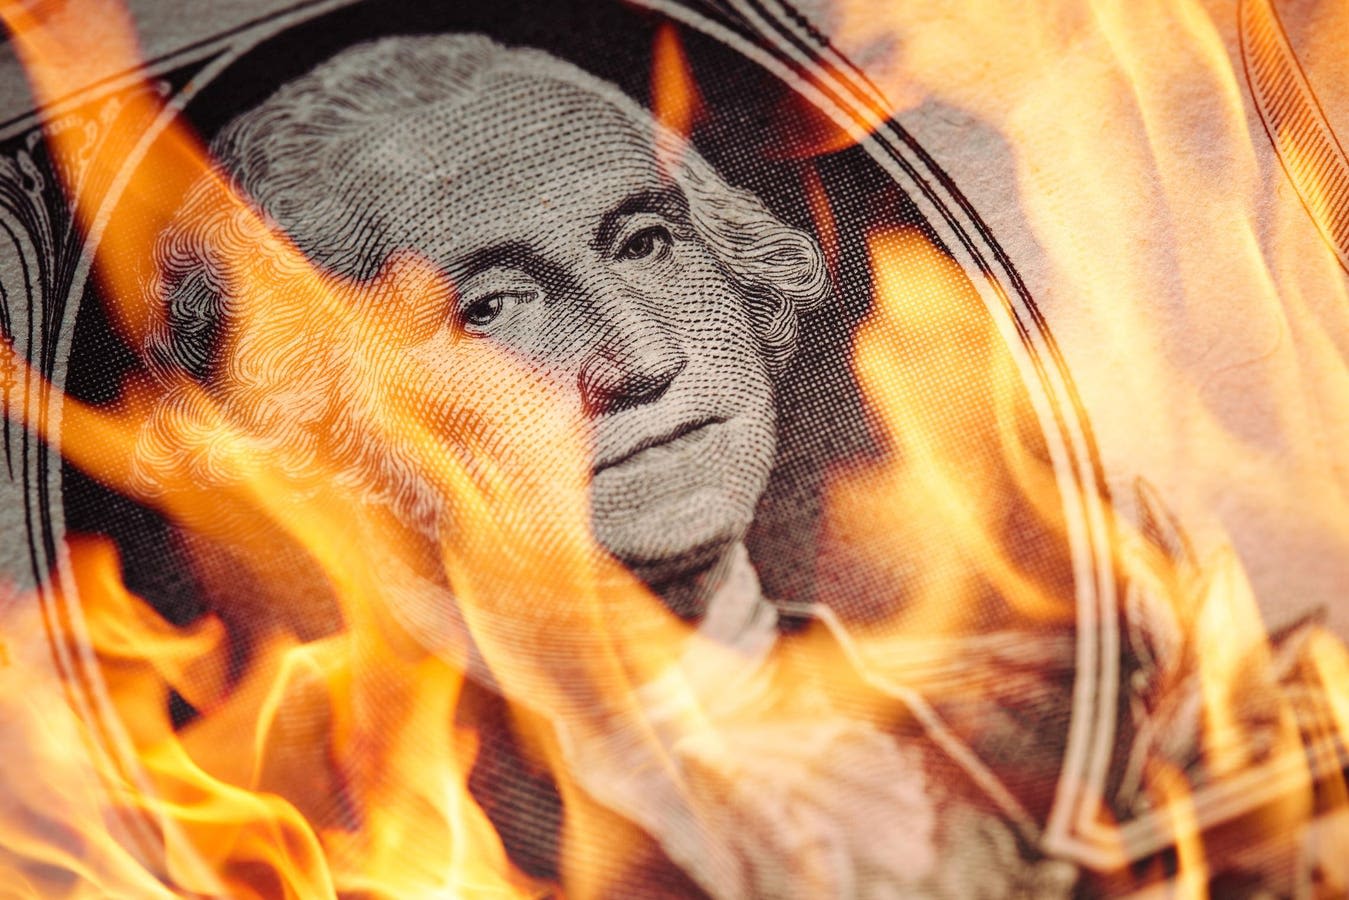 IMF Issues Serious U.S. Dollar Collapse Warning As The Fed Primes Bitcoin, Ethereum And XRP For A Crypto...